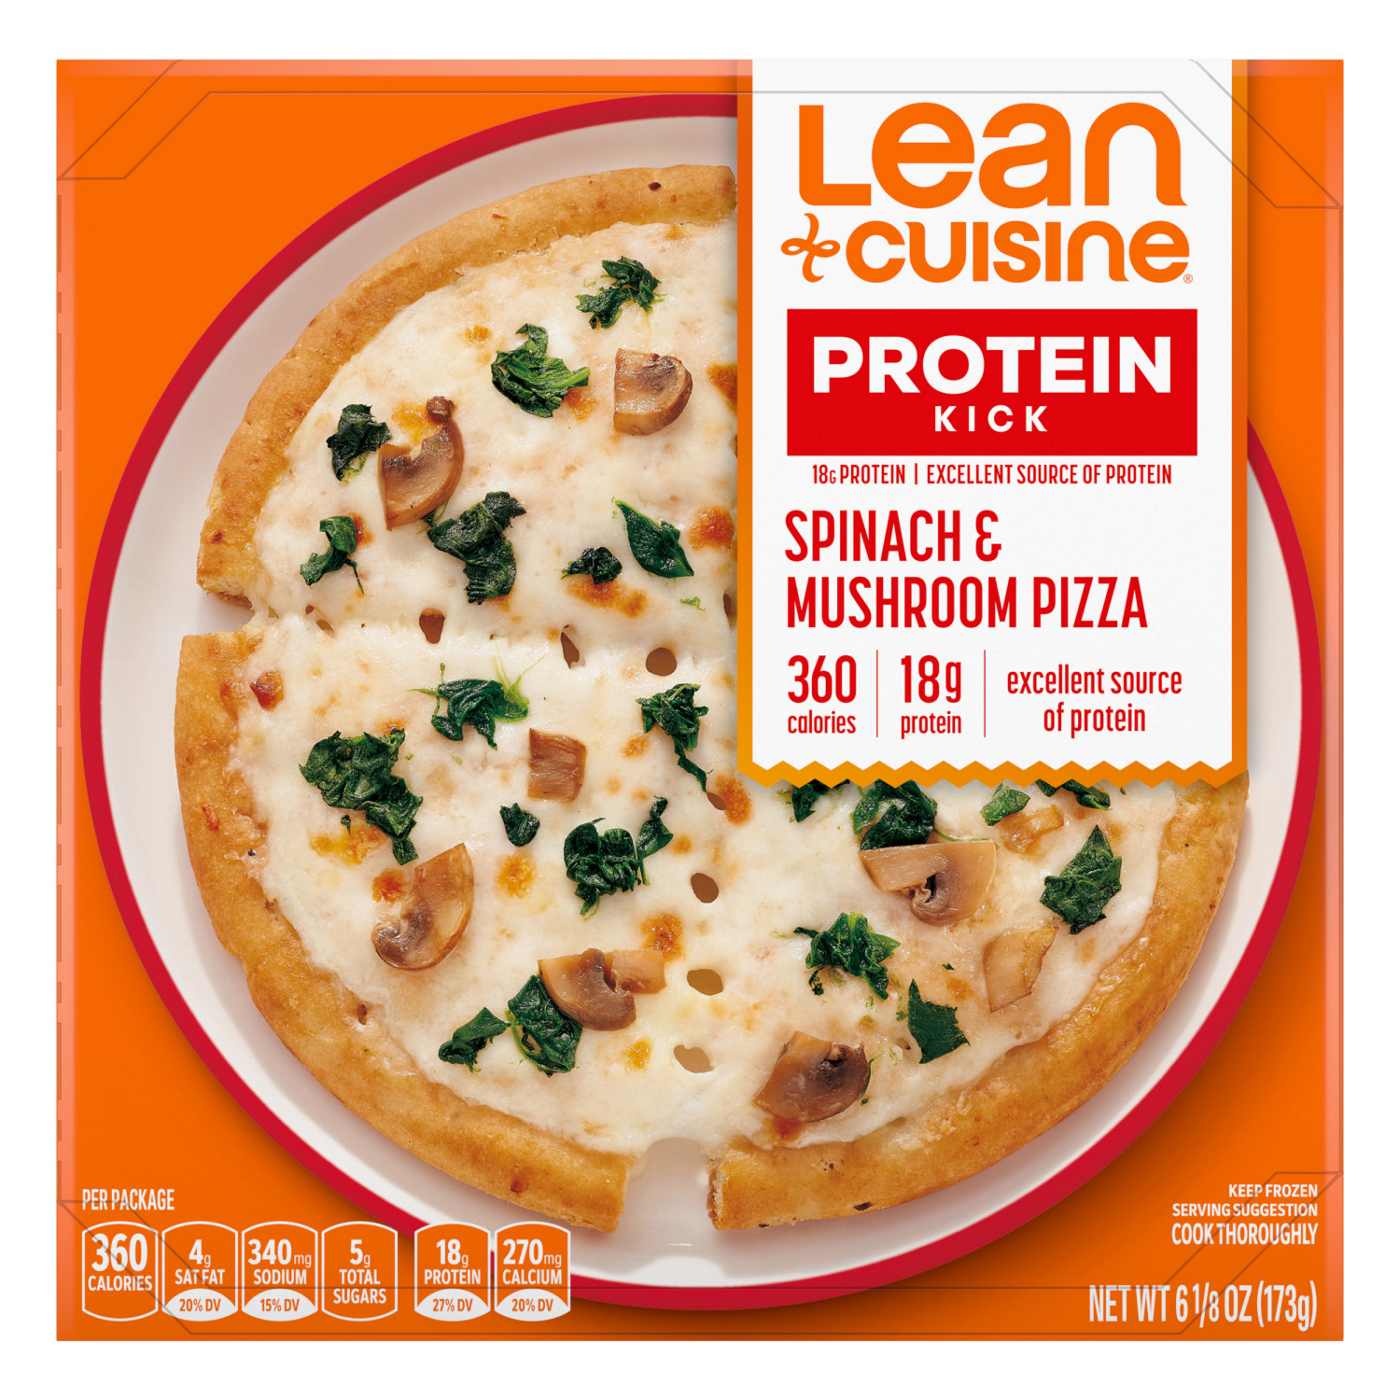 Lean Cuisine 18g Protein Frozen Pizza - Spinach & Mushroom; image 1 of 7